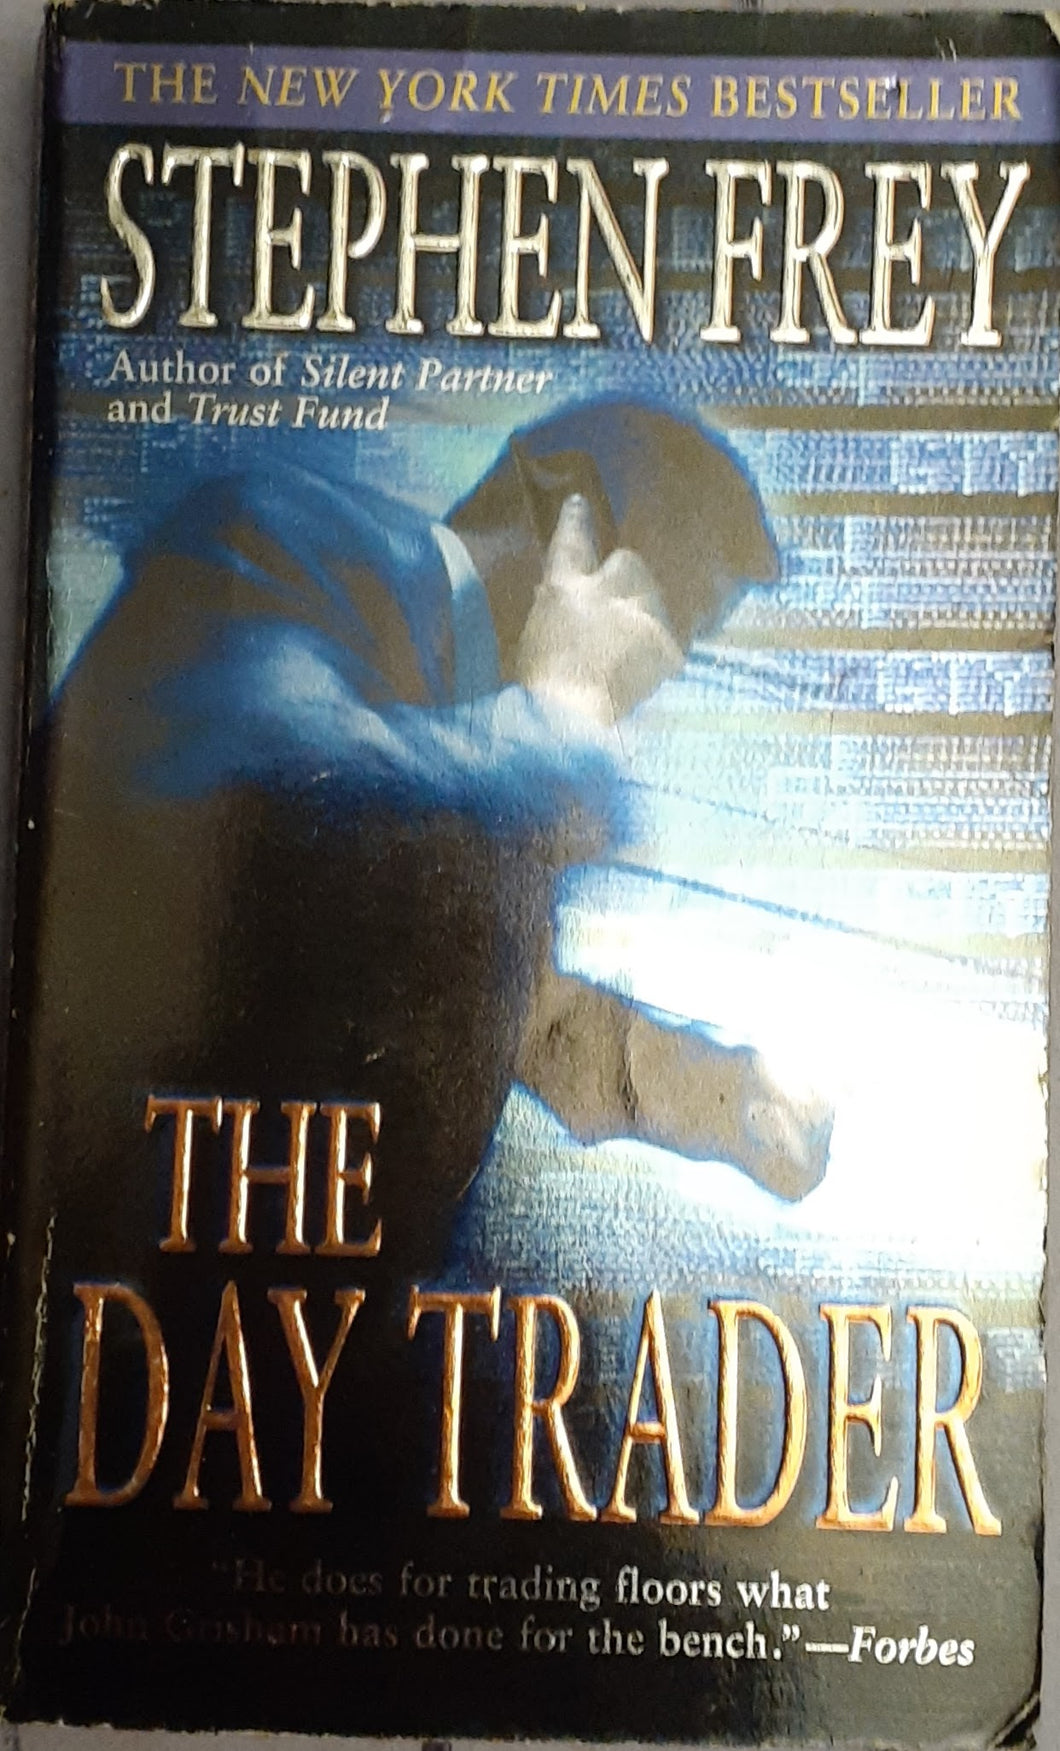 The Day Trader